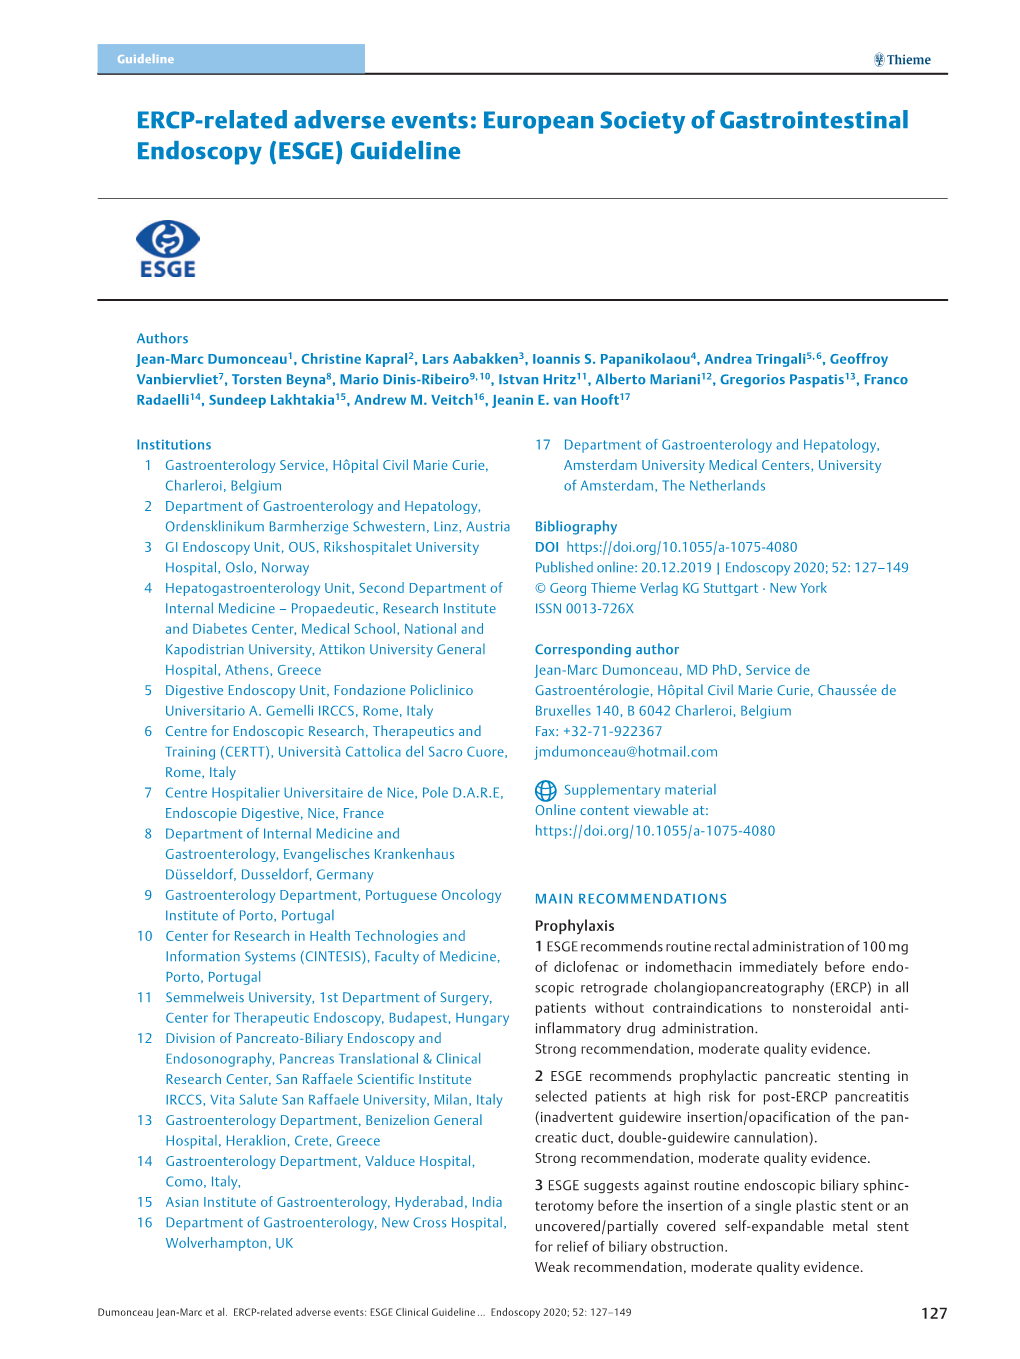 ERCP-Related Adverse Events: European Society of Gastrointestinal Endoscopy (ESGE) Guideline